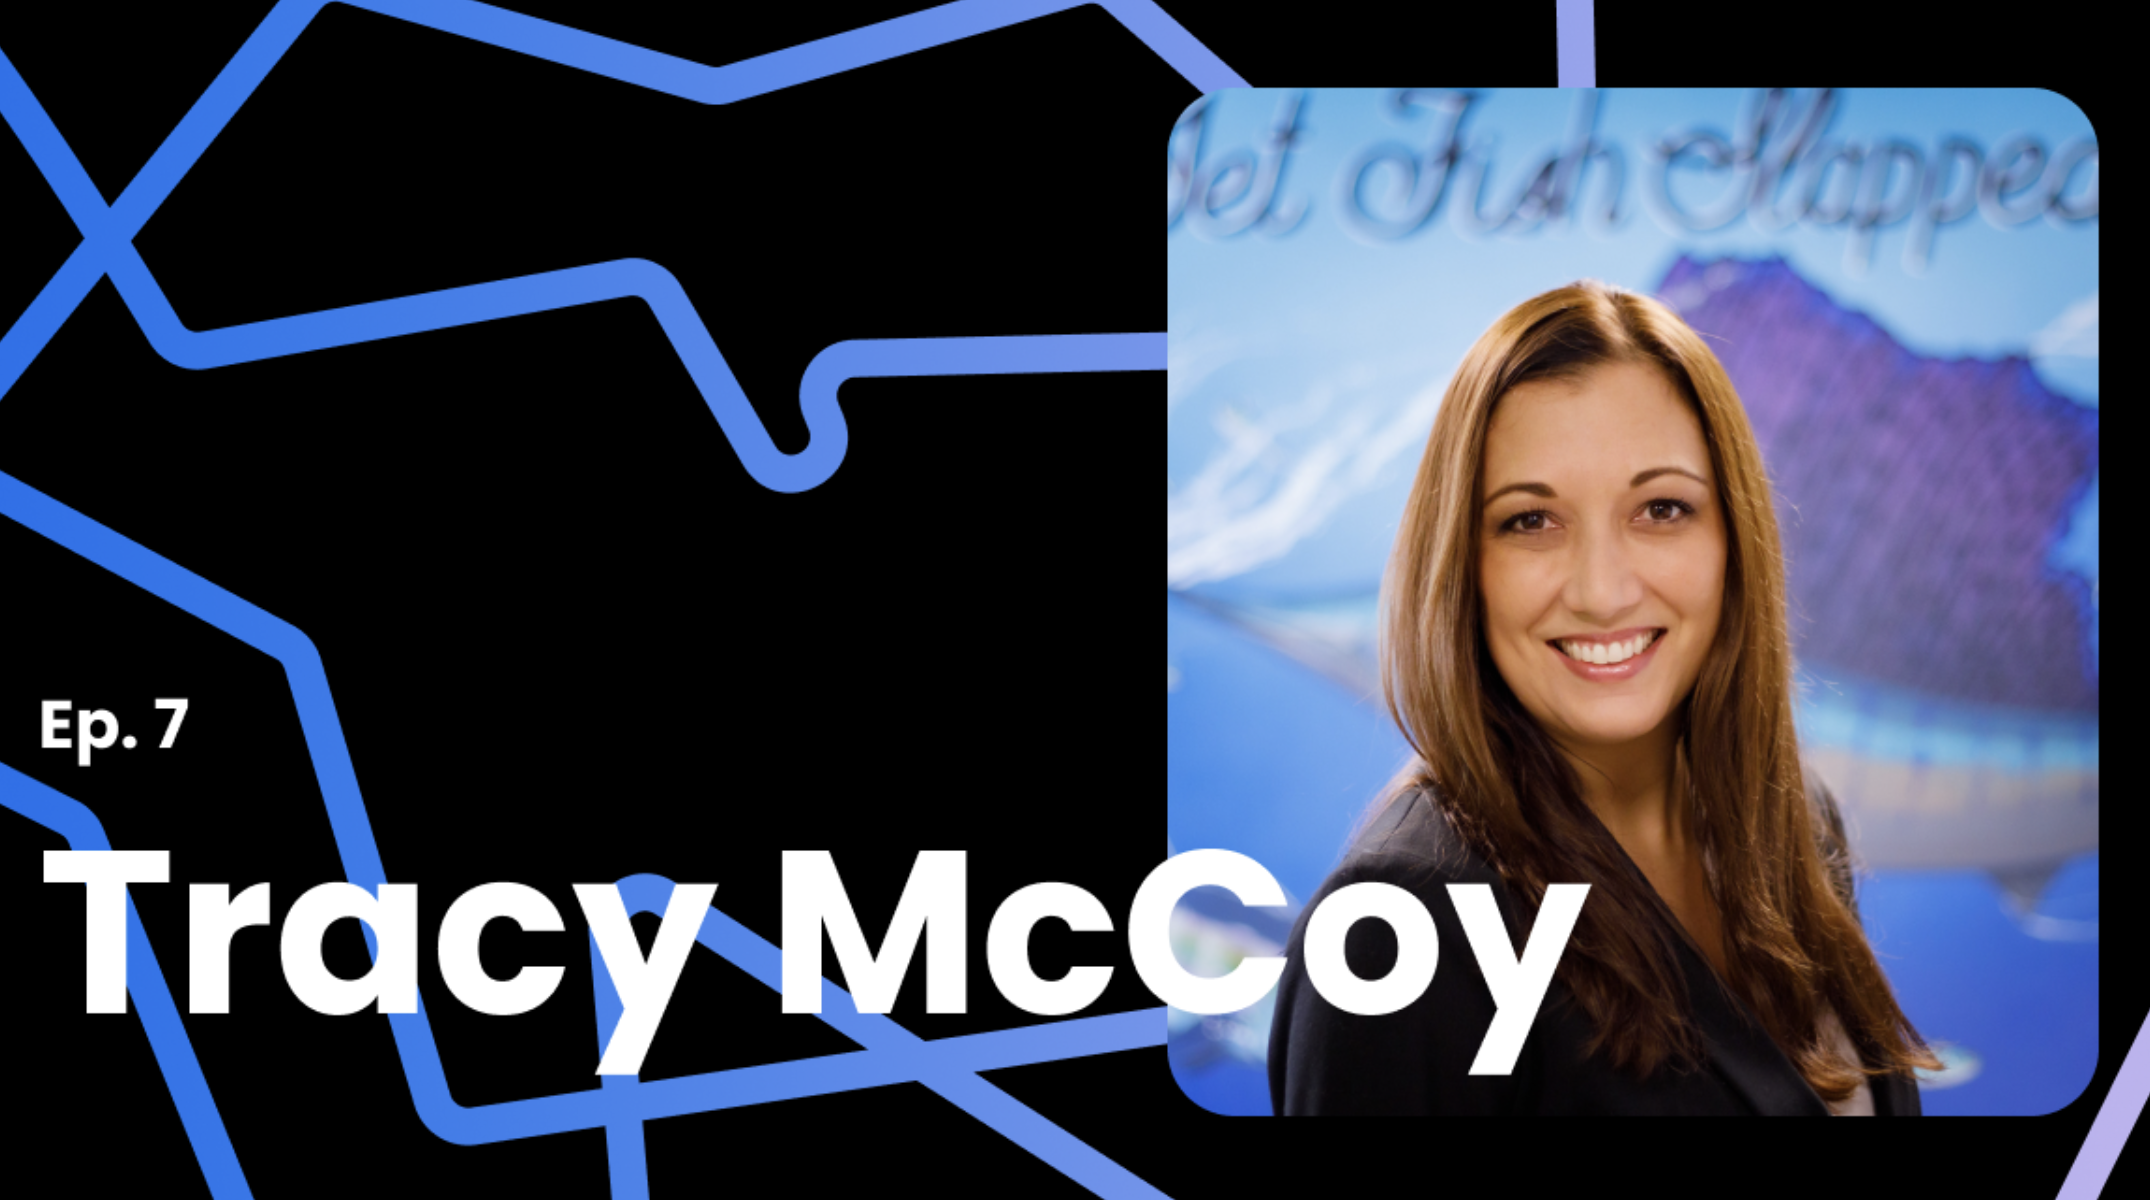 An Interview with Tracy McCoy, Founder of Social Media Agency Get Fish Slapped